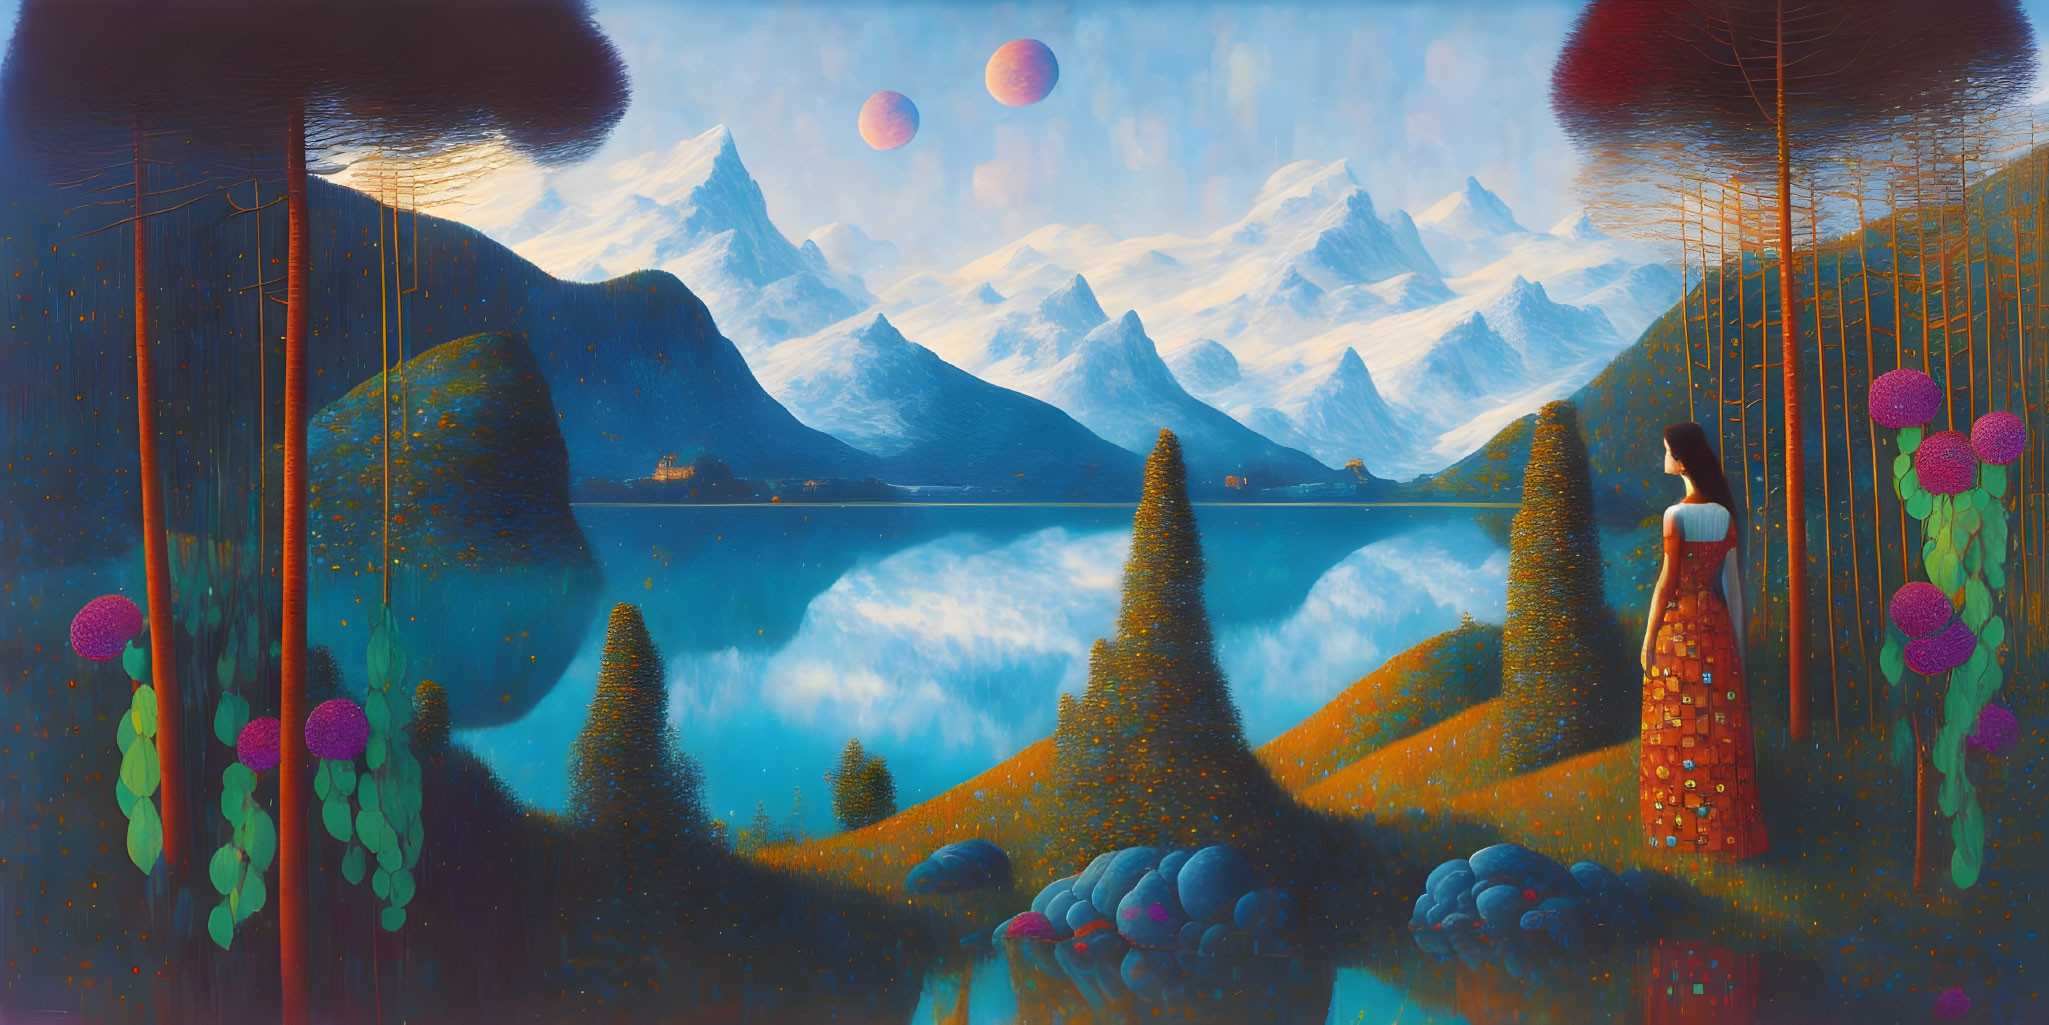 Surreal landscape with mountains, reflective lake, moons, flora, and woman in patterned dress